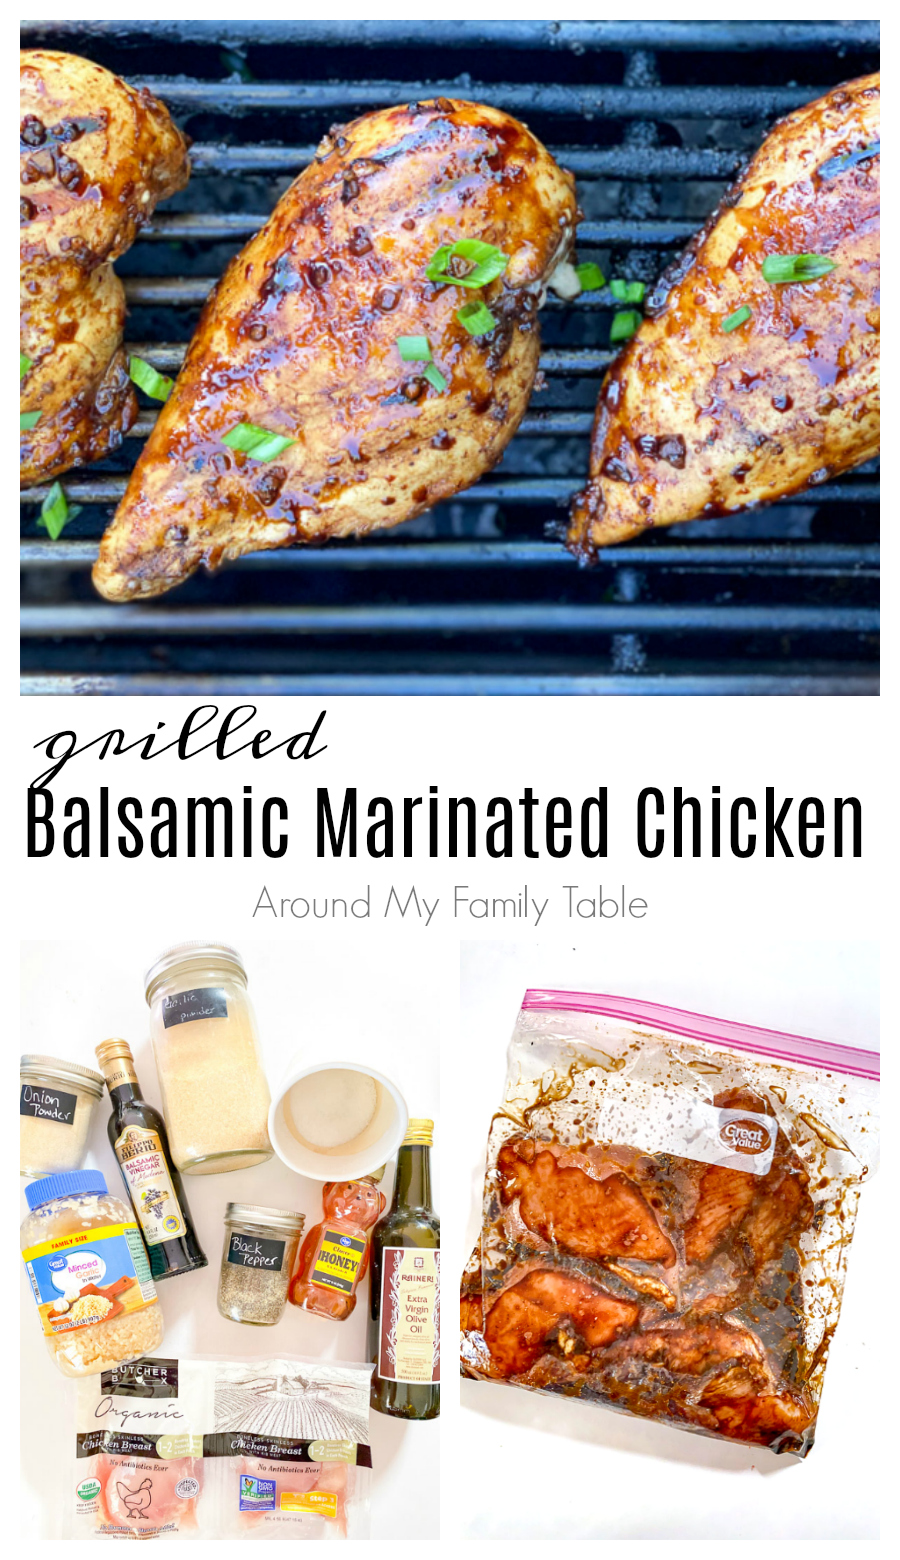 A delicious balsamic marinated chicken that is perfectly grilled! via @slingmama